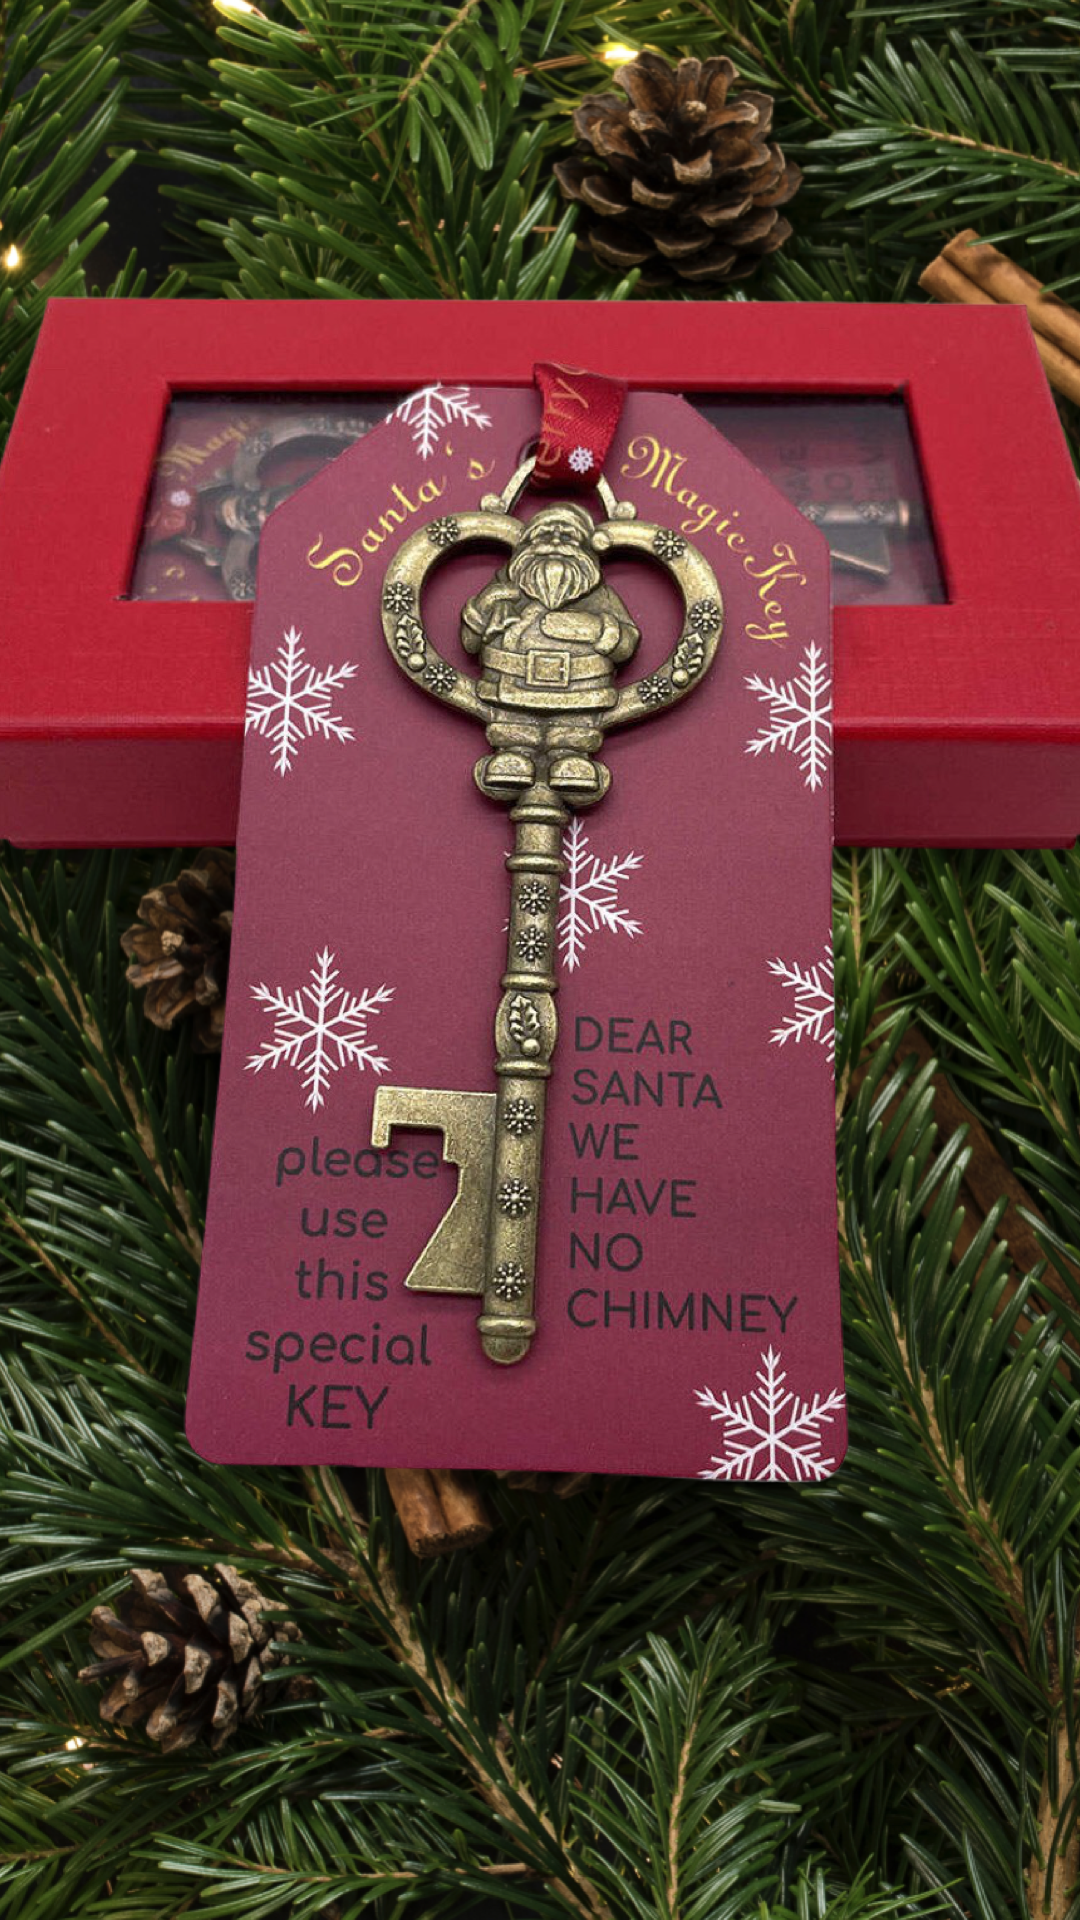 Santa's Magic Key for homes without a chimney